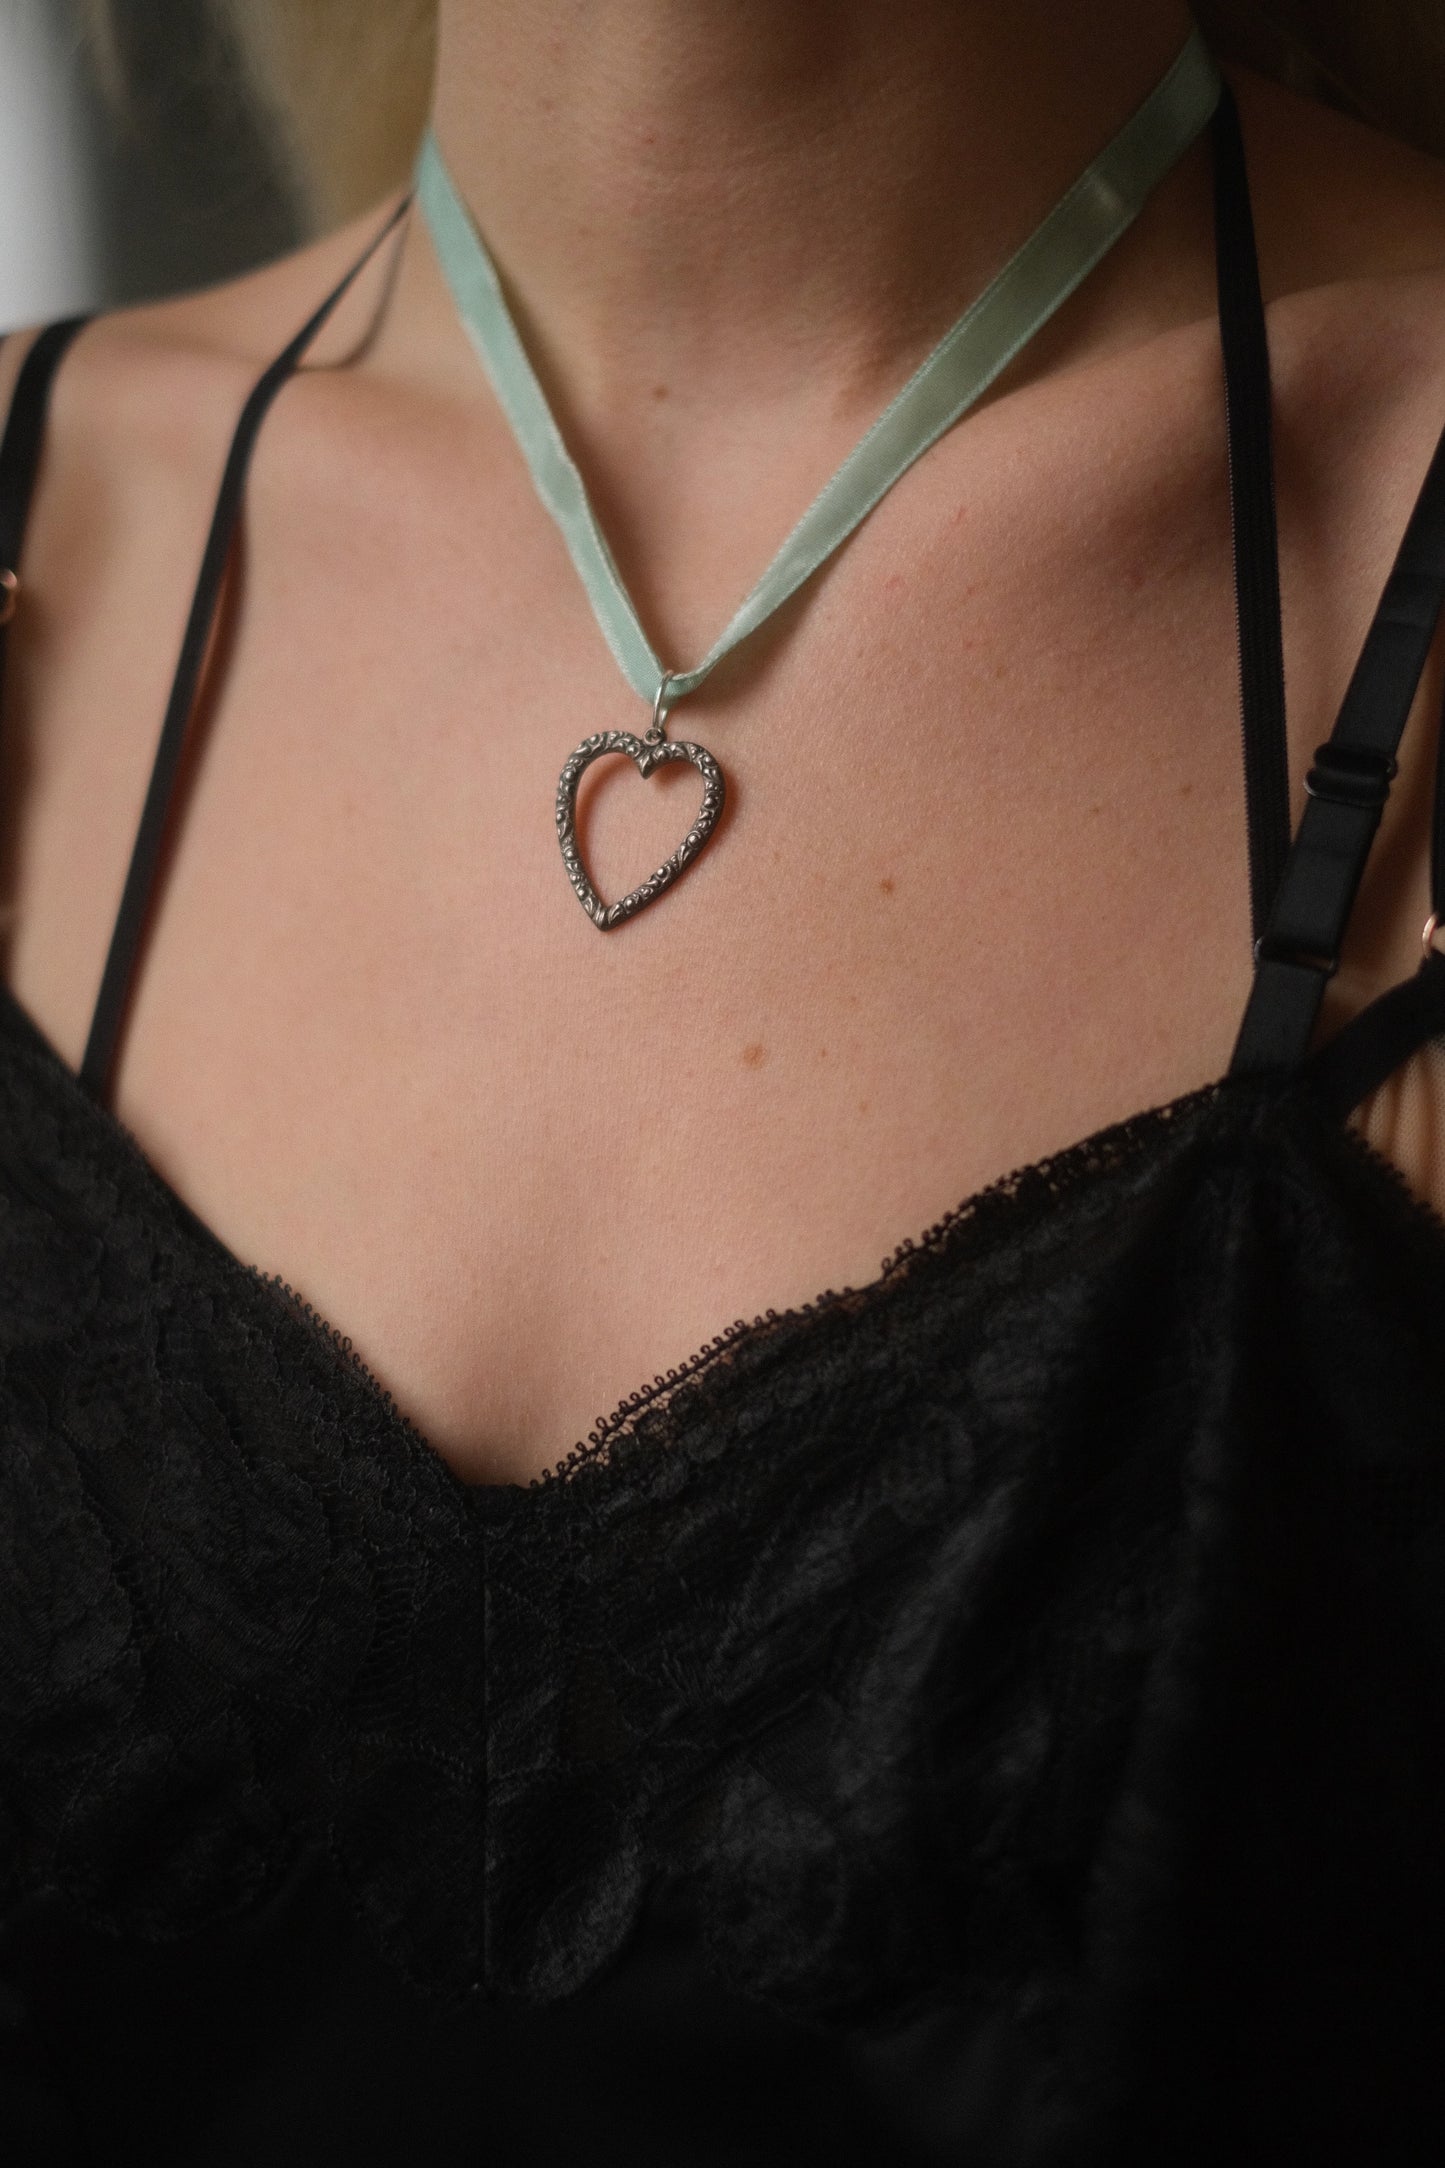 Necklace 11